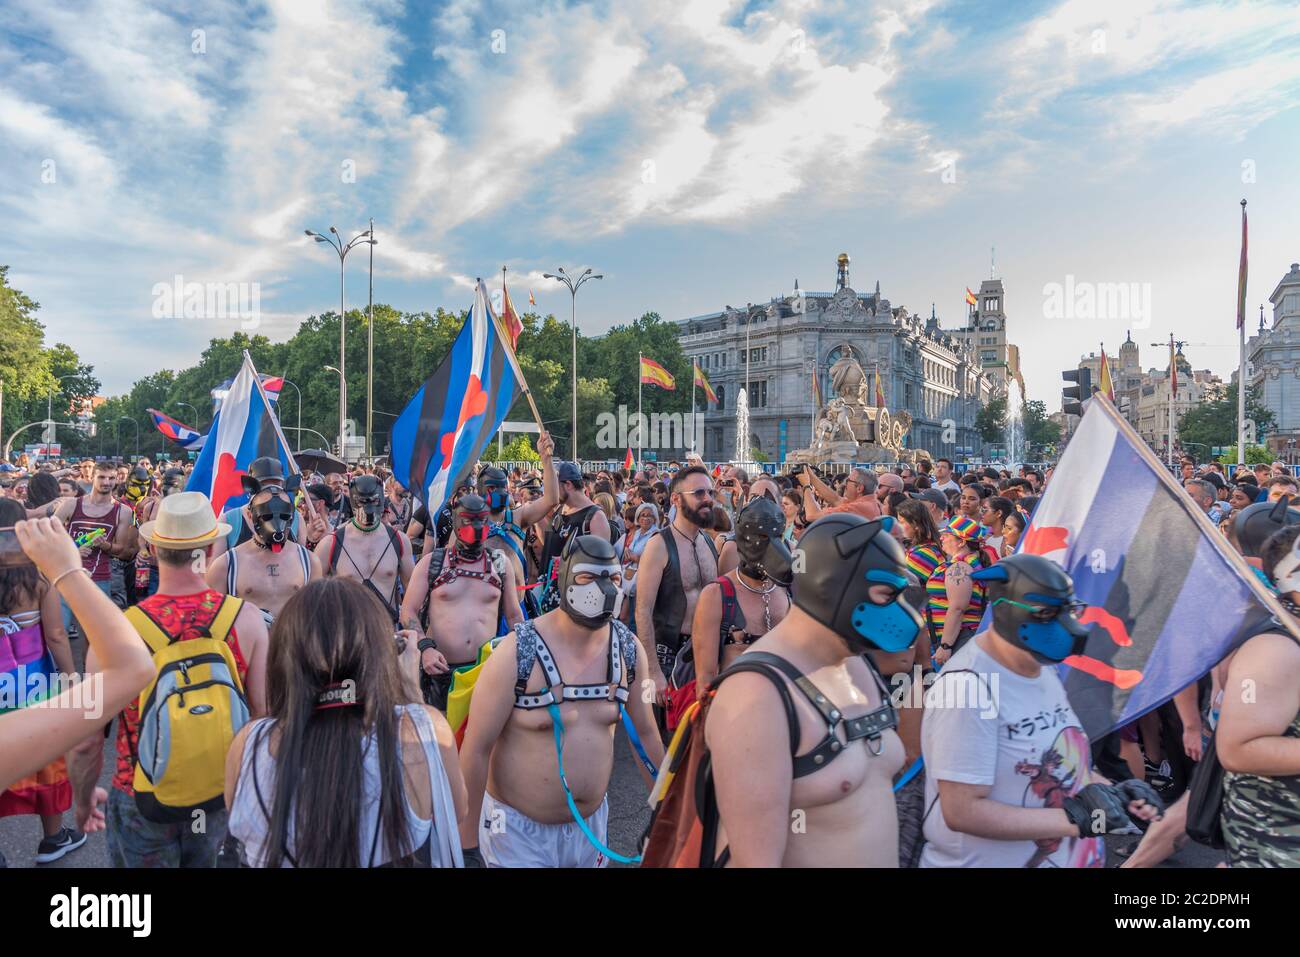 Madrid, Spain - July 06, 2019: in Madrid, Gay pride day celebrations. A group of people standing in front of a crowd Stock Photo